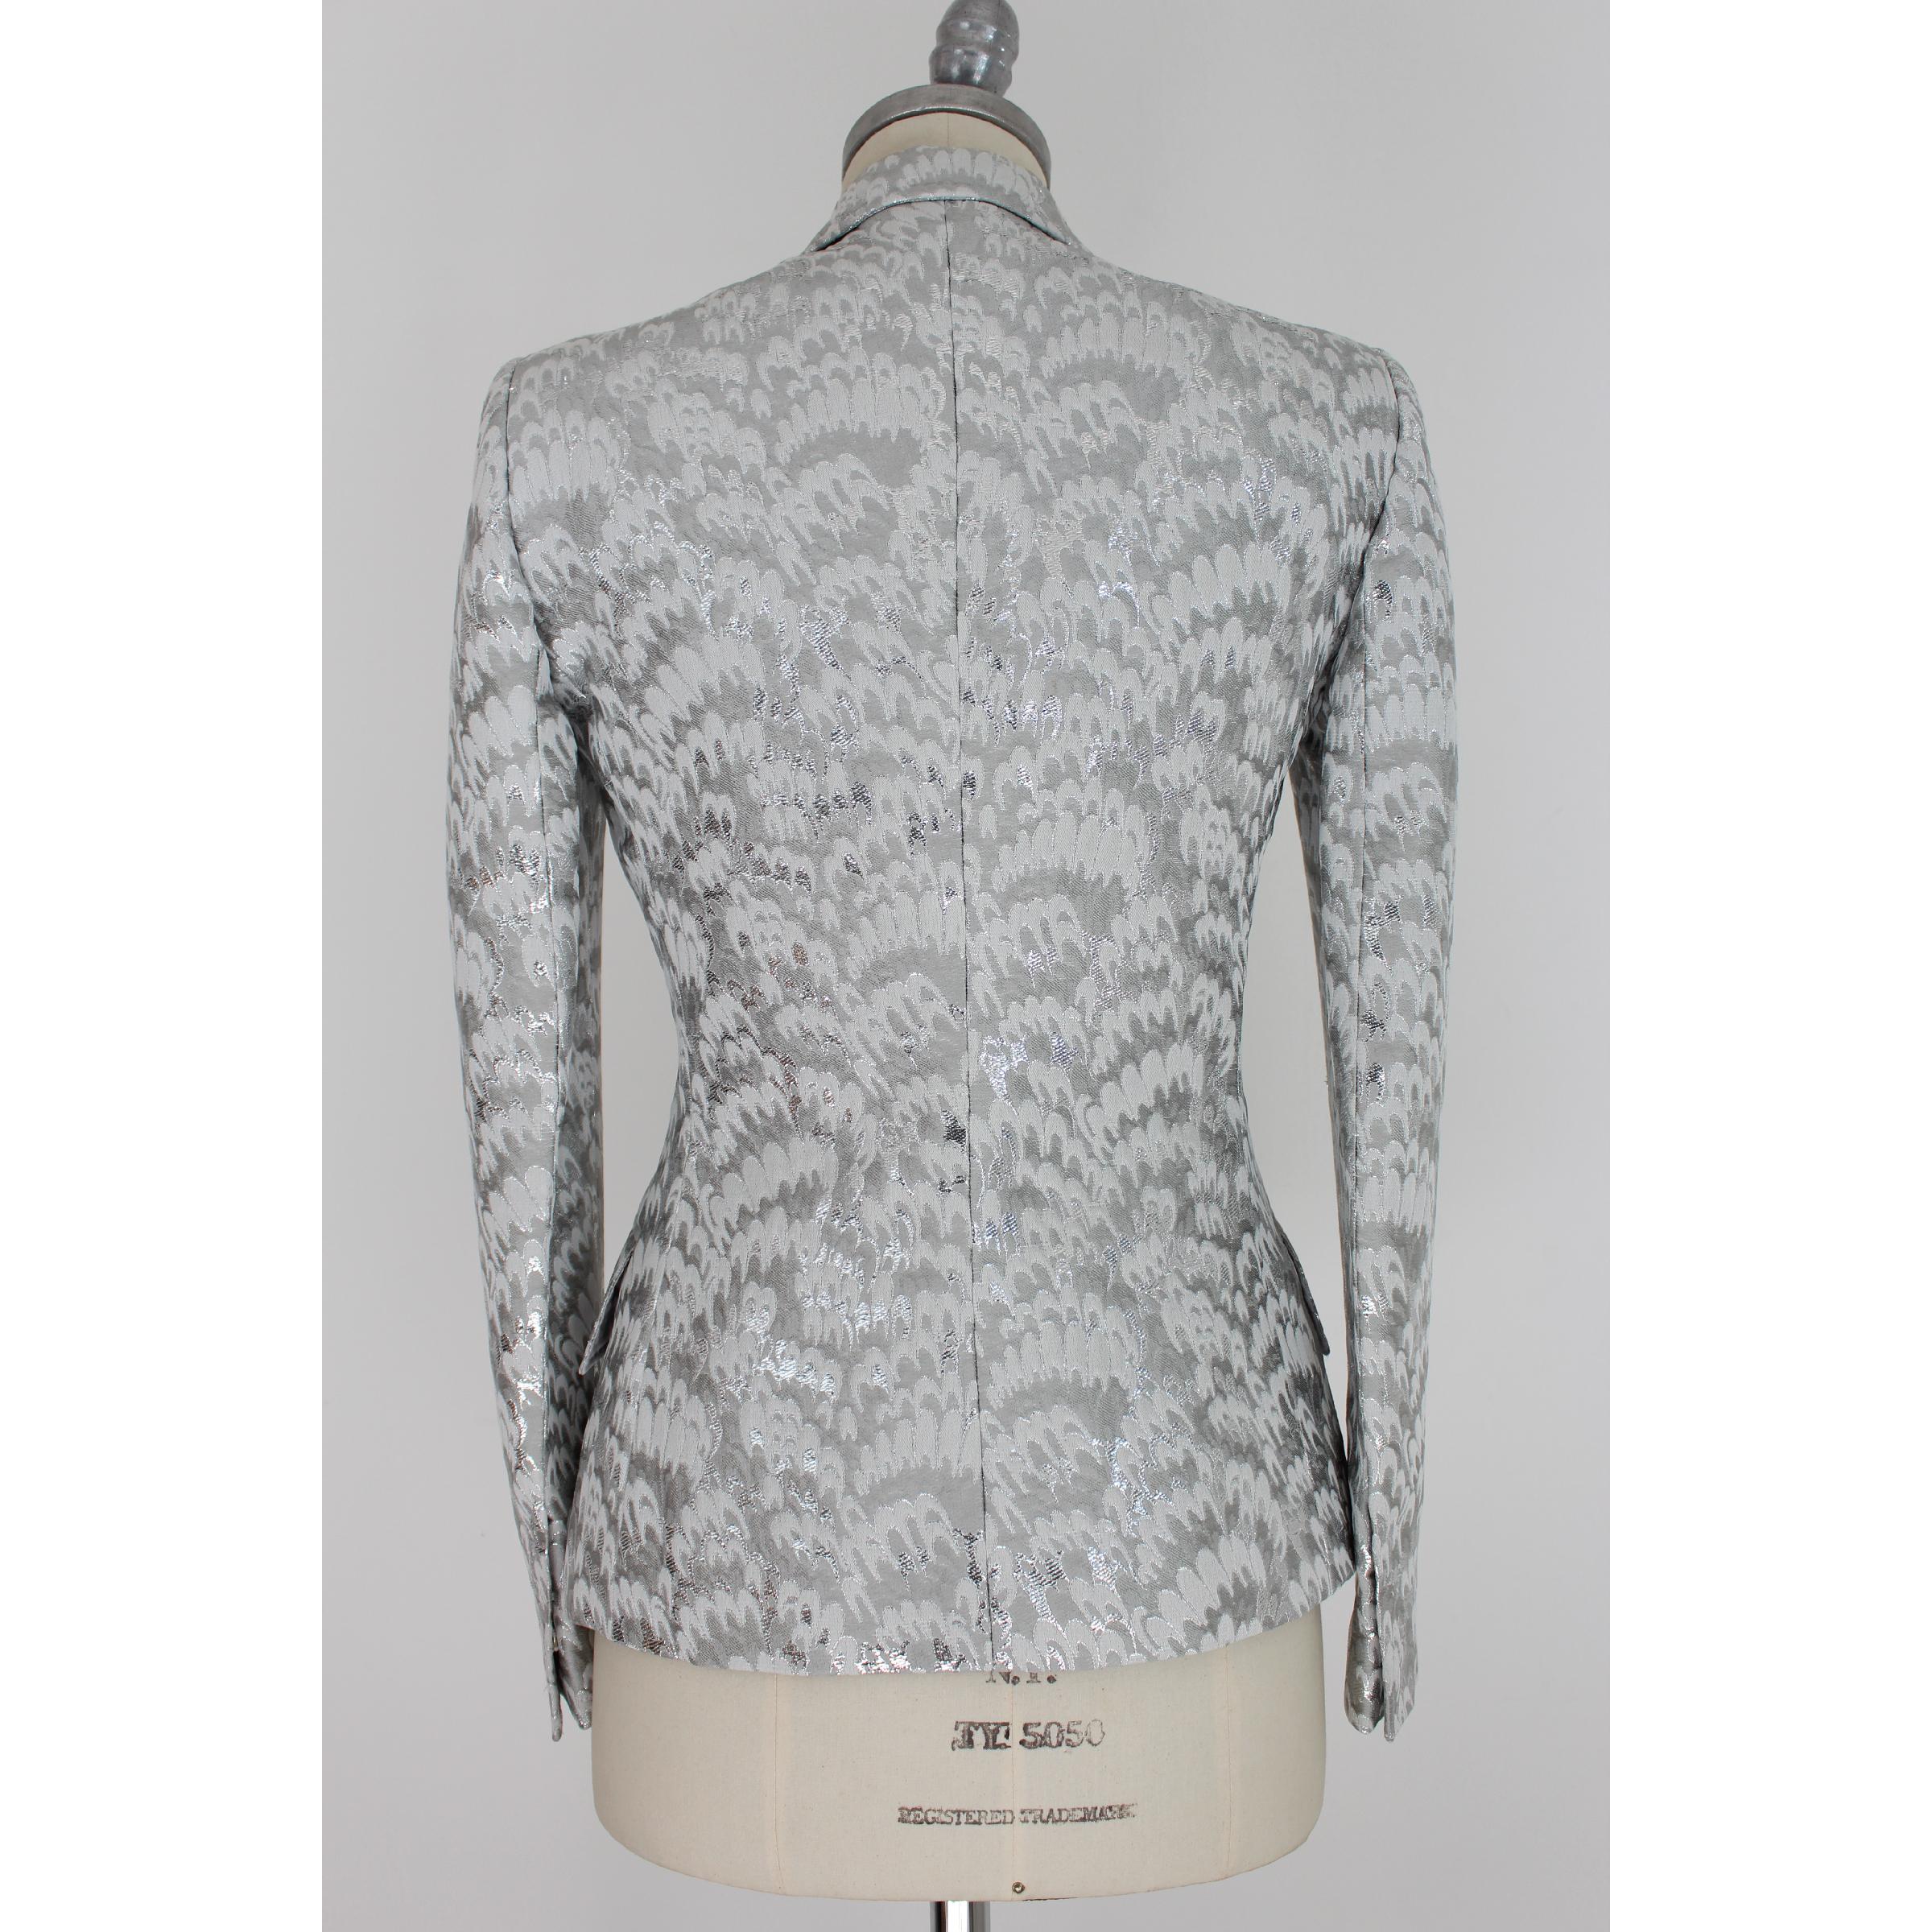 Dolce & Gabbana vintage women's jacket, white and gray damask color with silver thread. Closure with hidden buttons. 52% acetate 36% cotton 7% polyester 5% polyamide. 100% silk lining. 1990s. Made in Italy. Excellent vintage conditions.

Size: 40 It